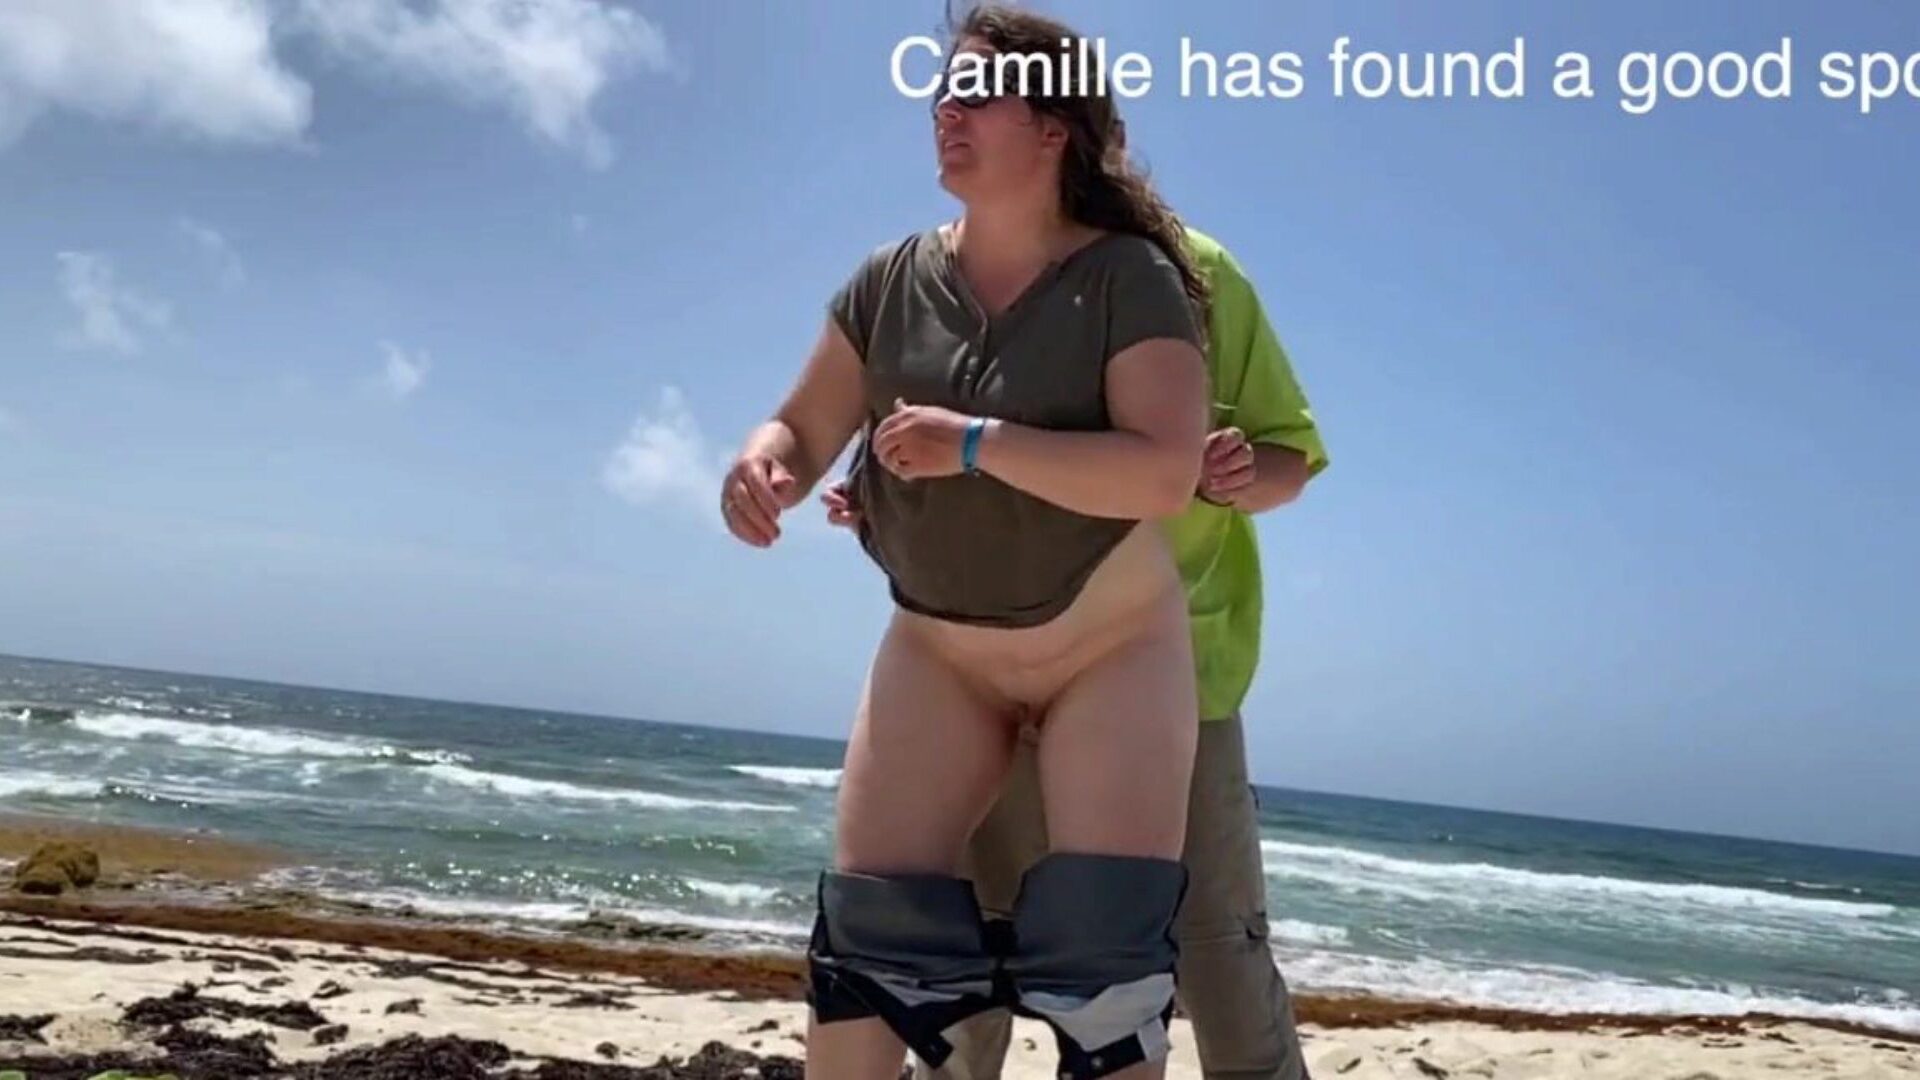 Camille watched having hump on the beach Camille found a precious spot with some people observing Be noisy so everyone will watch